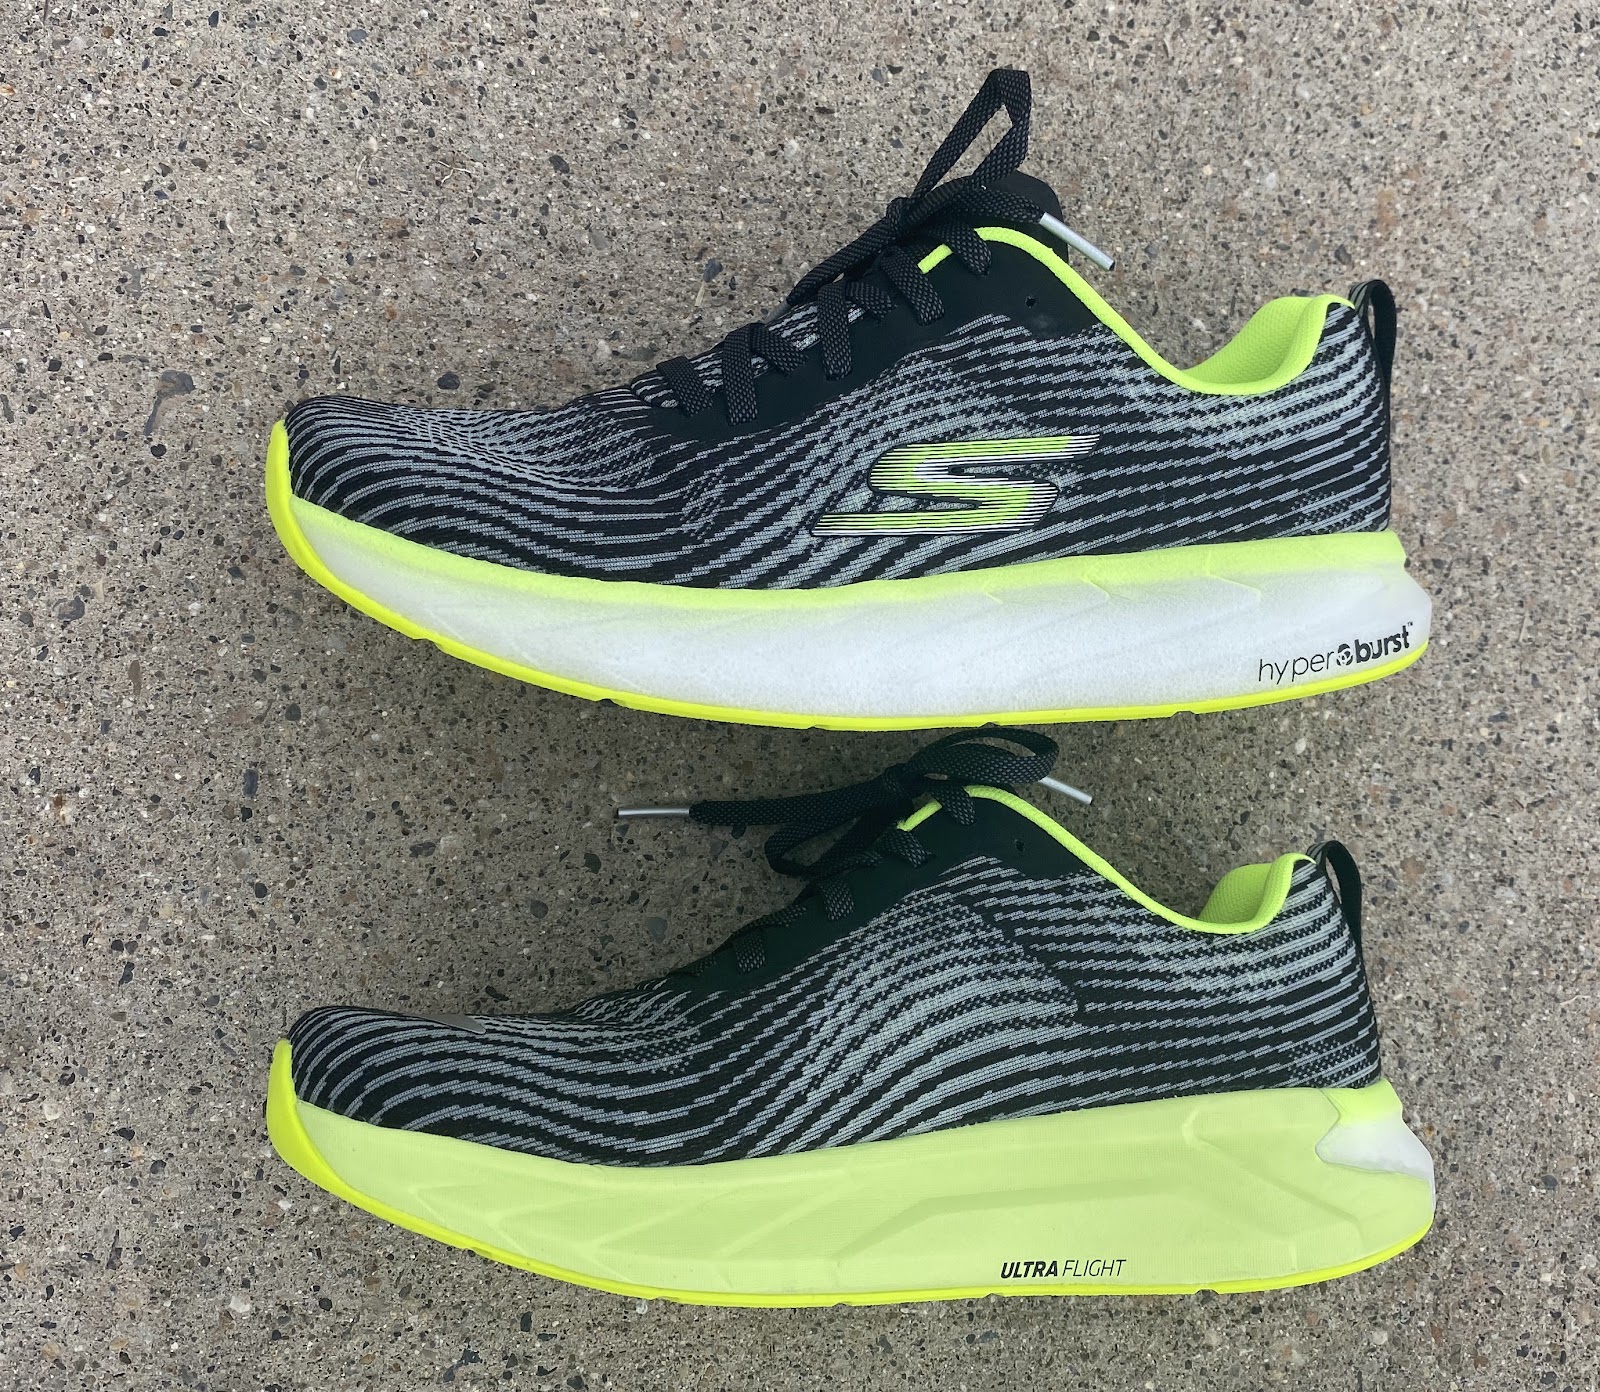 Road Trail Run: Skechers Performance Go Run Forza 4 Multi Tester Review: A Tale Two Densities